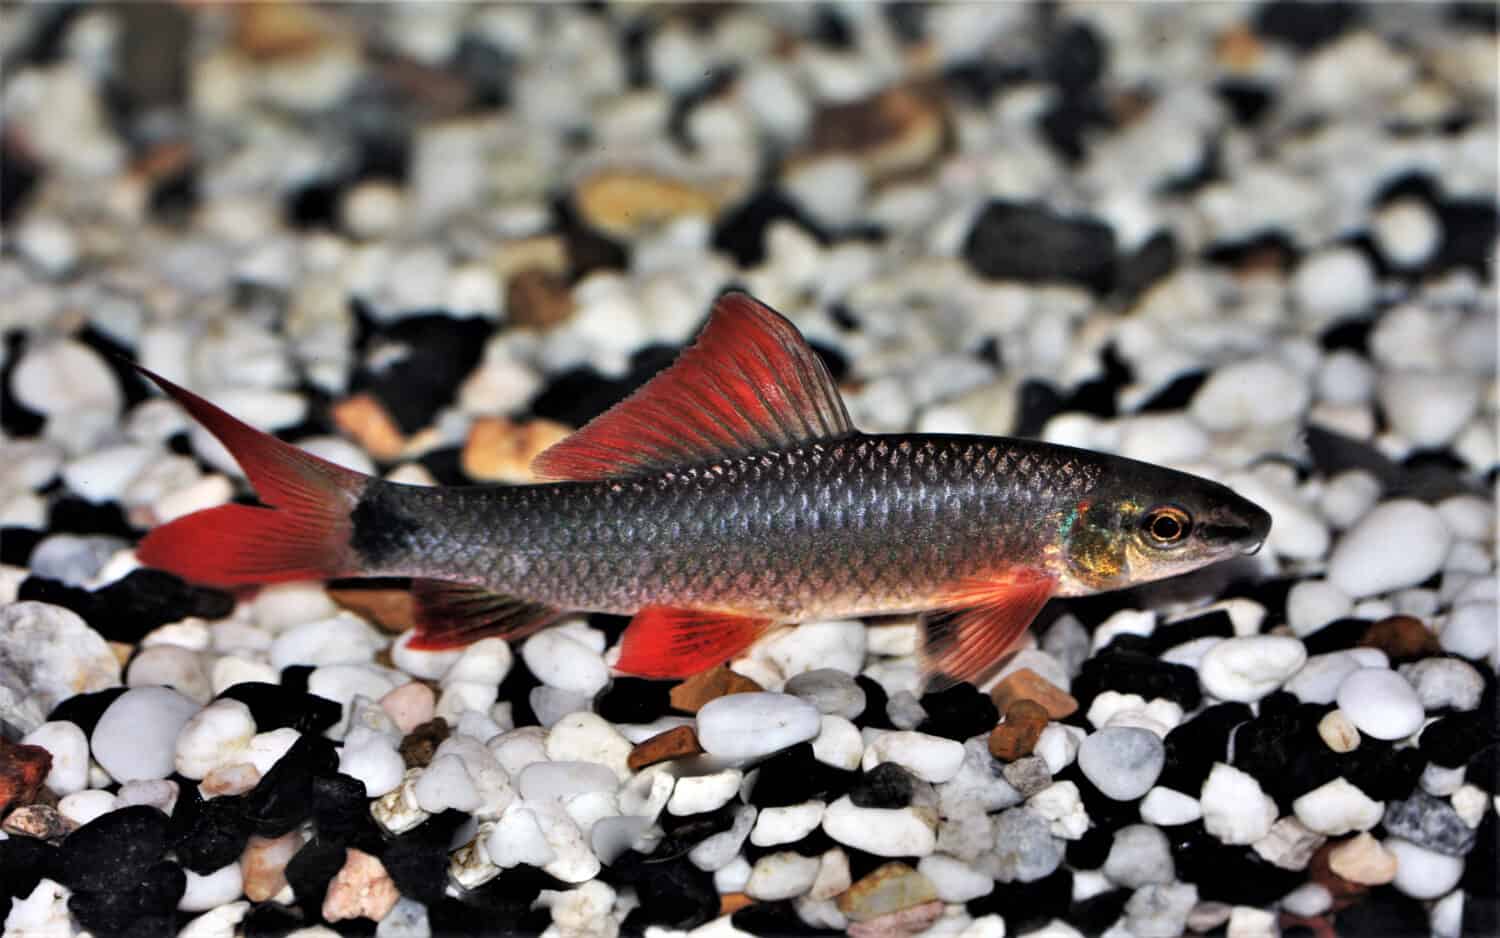 The beautiful rainbow shark in freshwater aquarium. Epalzeorhynchos frenatum is a species of Southeast Asian freshwater fish from the family Cyprinidae.